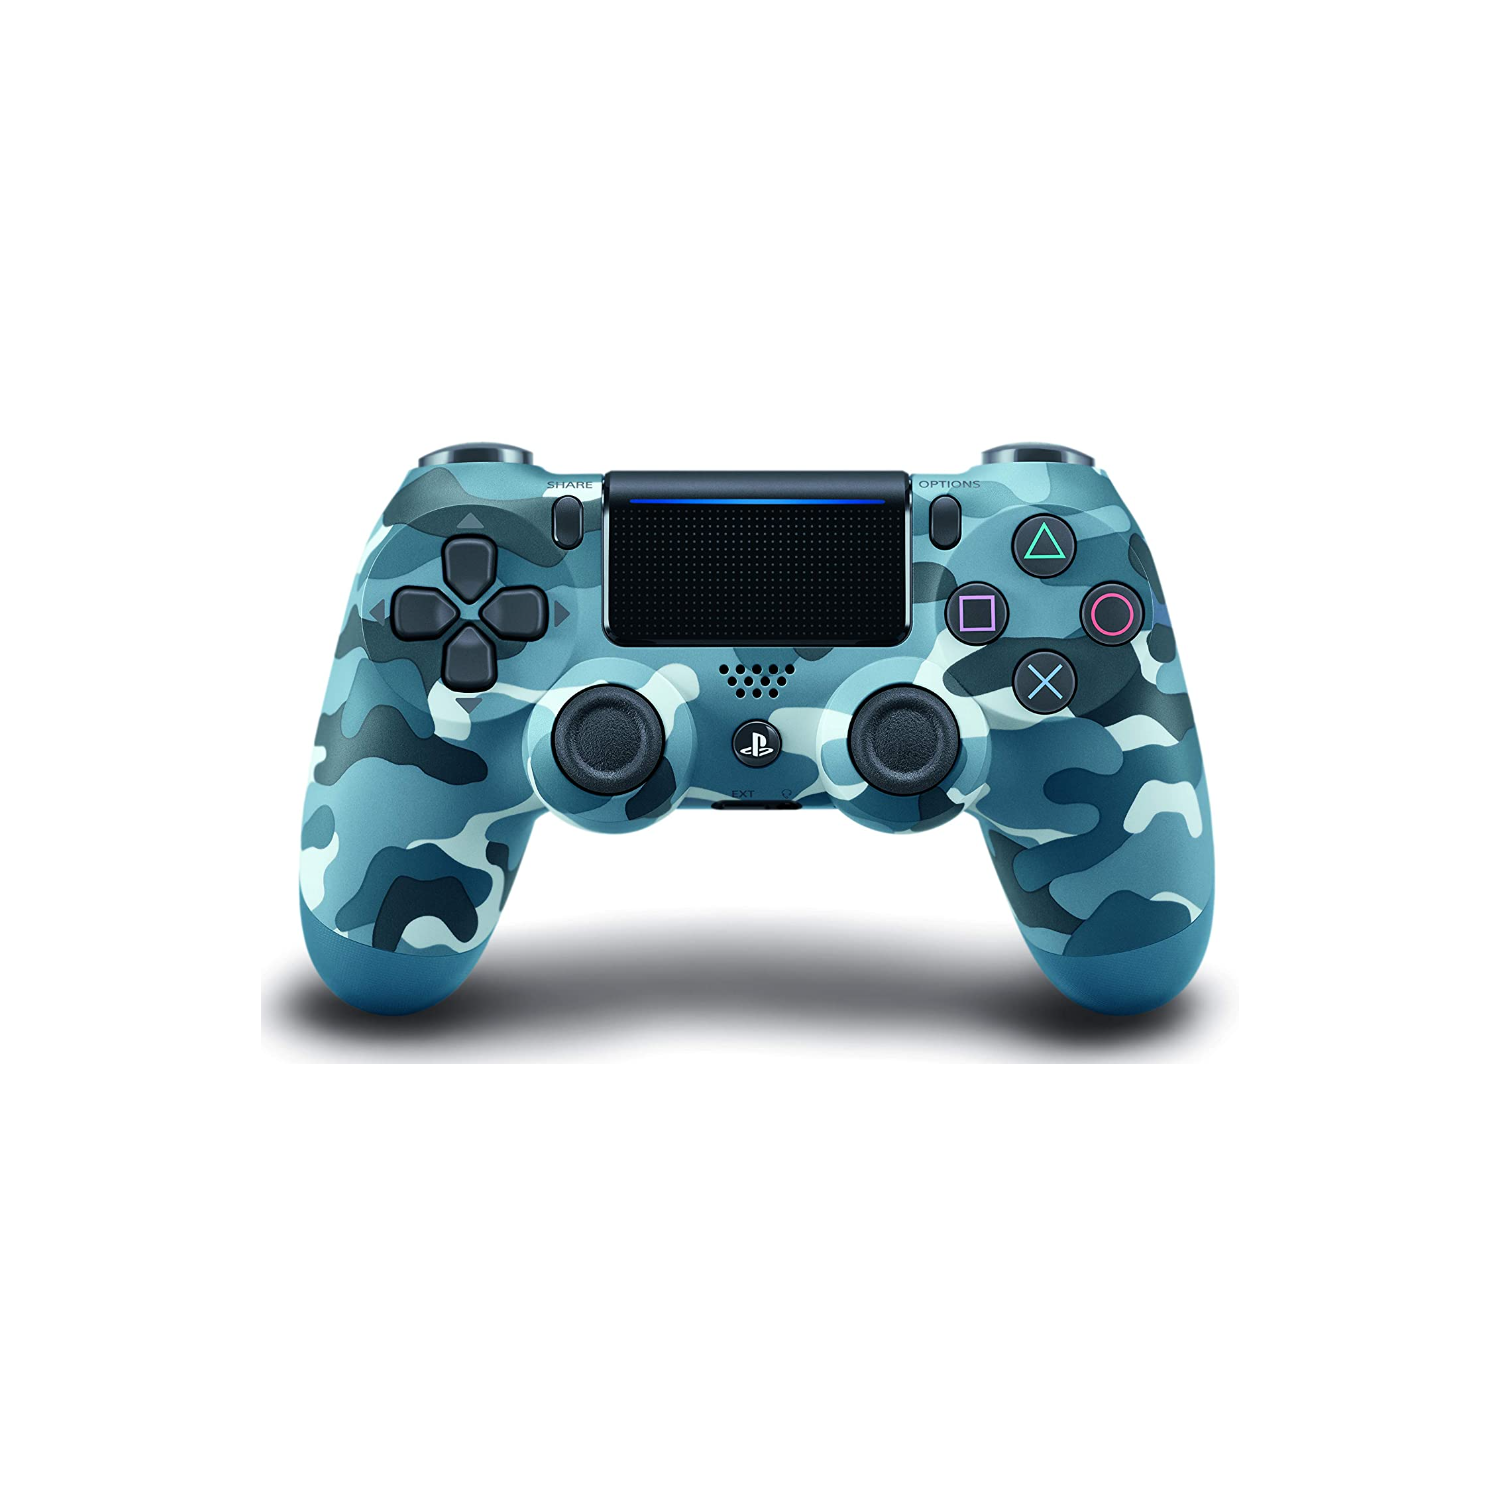 Open Box REFURBISHED PS4 DualShock 4 Wireless Controller Joystick for PS4 with Charging Cable (Blue Camouflage)